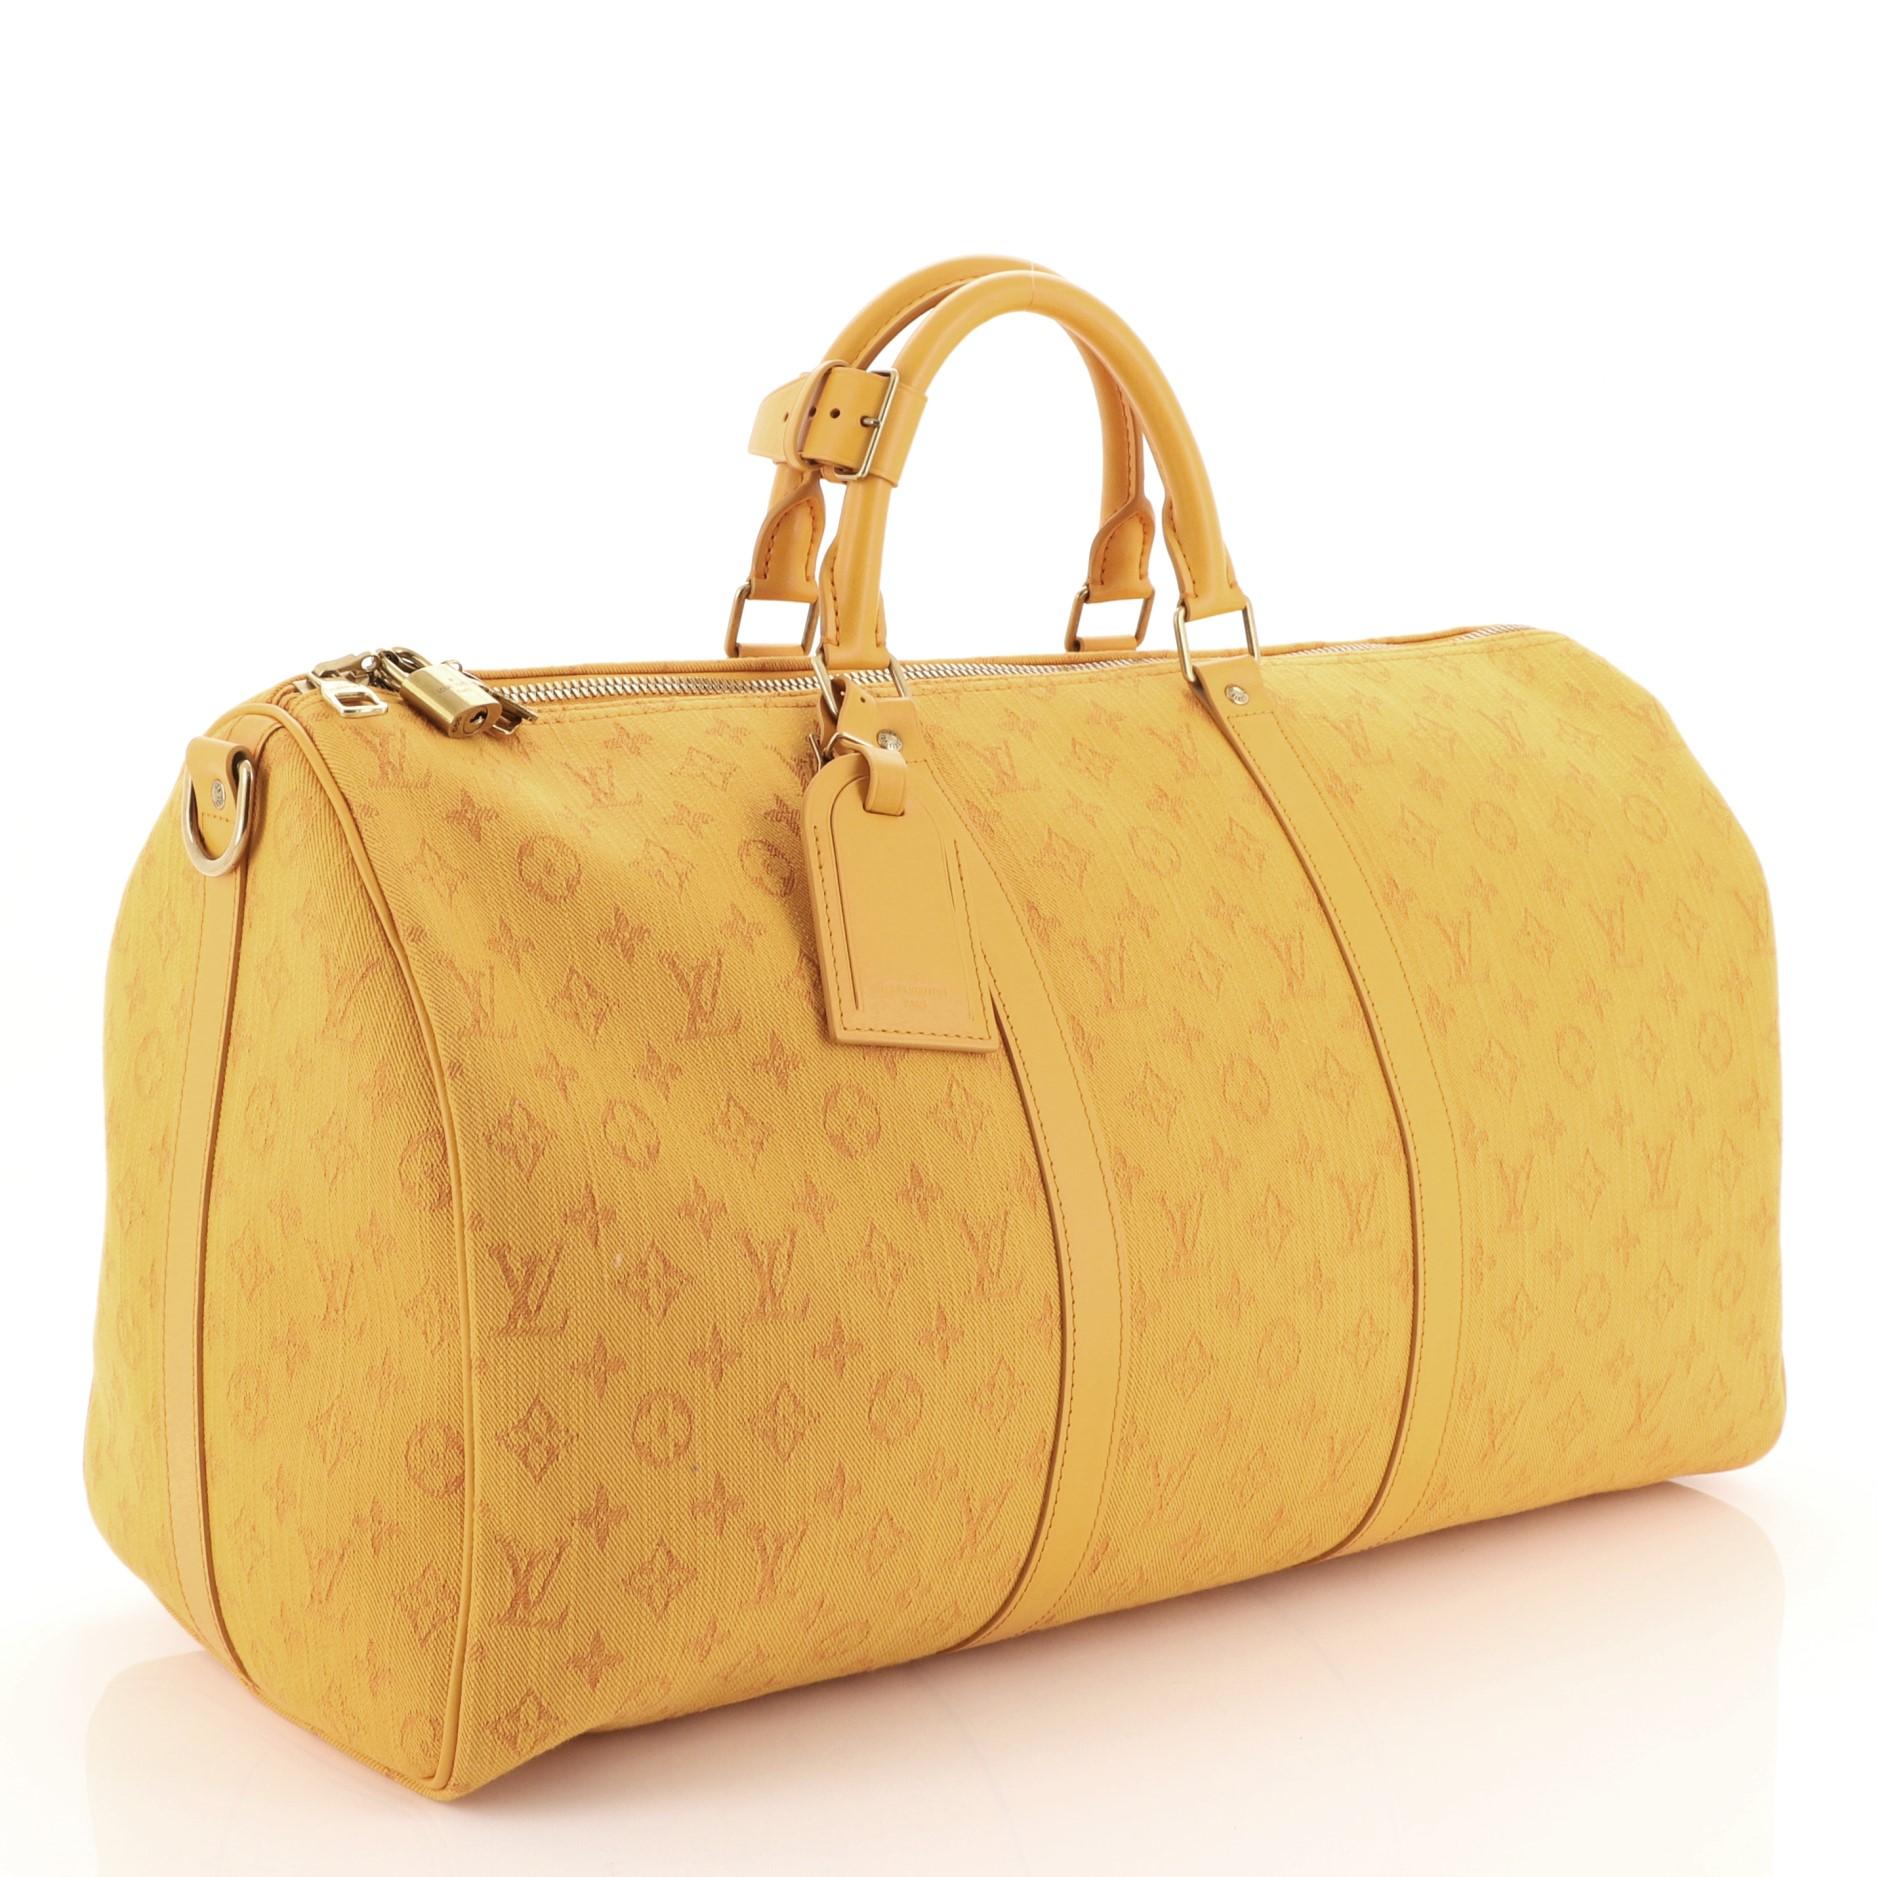 This Louis Vuitton Keepall Bandouliere Bag Monogram Denim 50, crafted from yellow denim, features dual rolled handles, natural leather trim, and gold-tone hardware. Its zip closure opens to a yellow fabric interior with zip pocket. Authenticity code